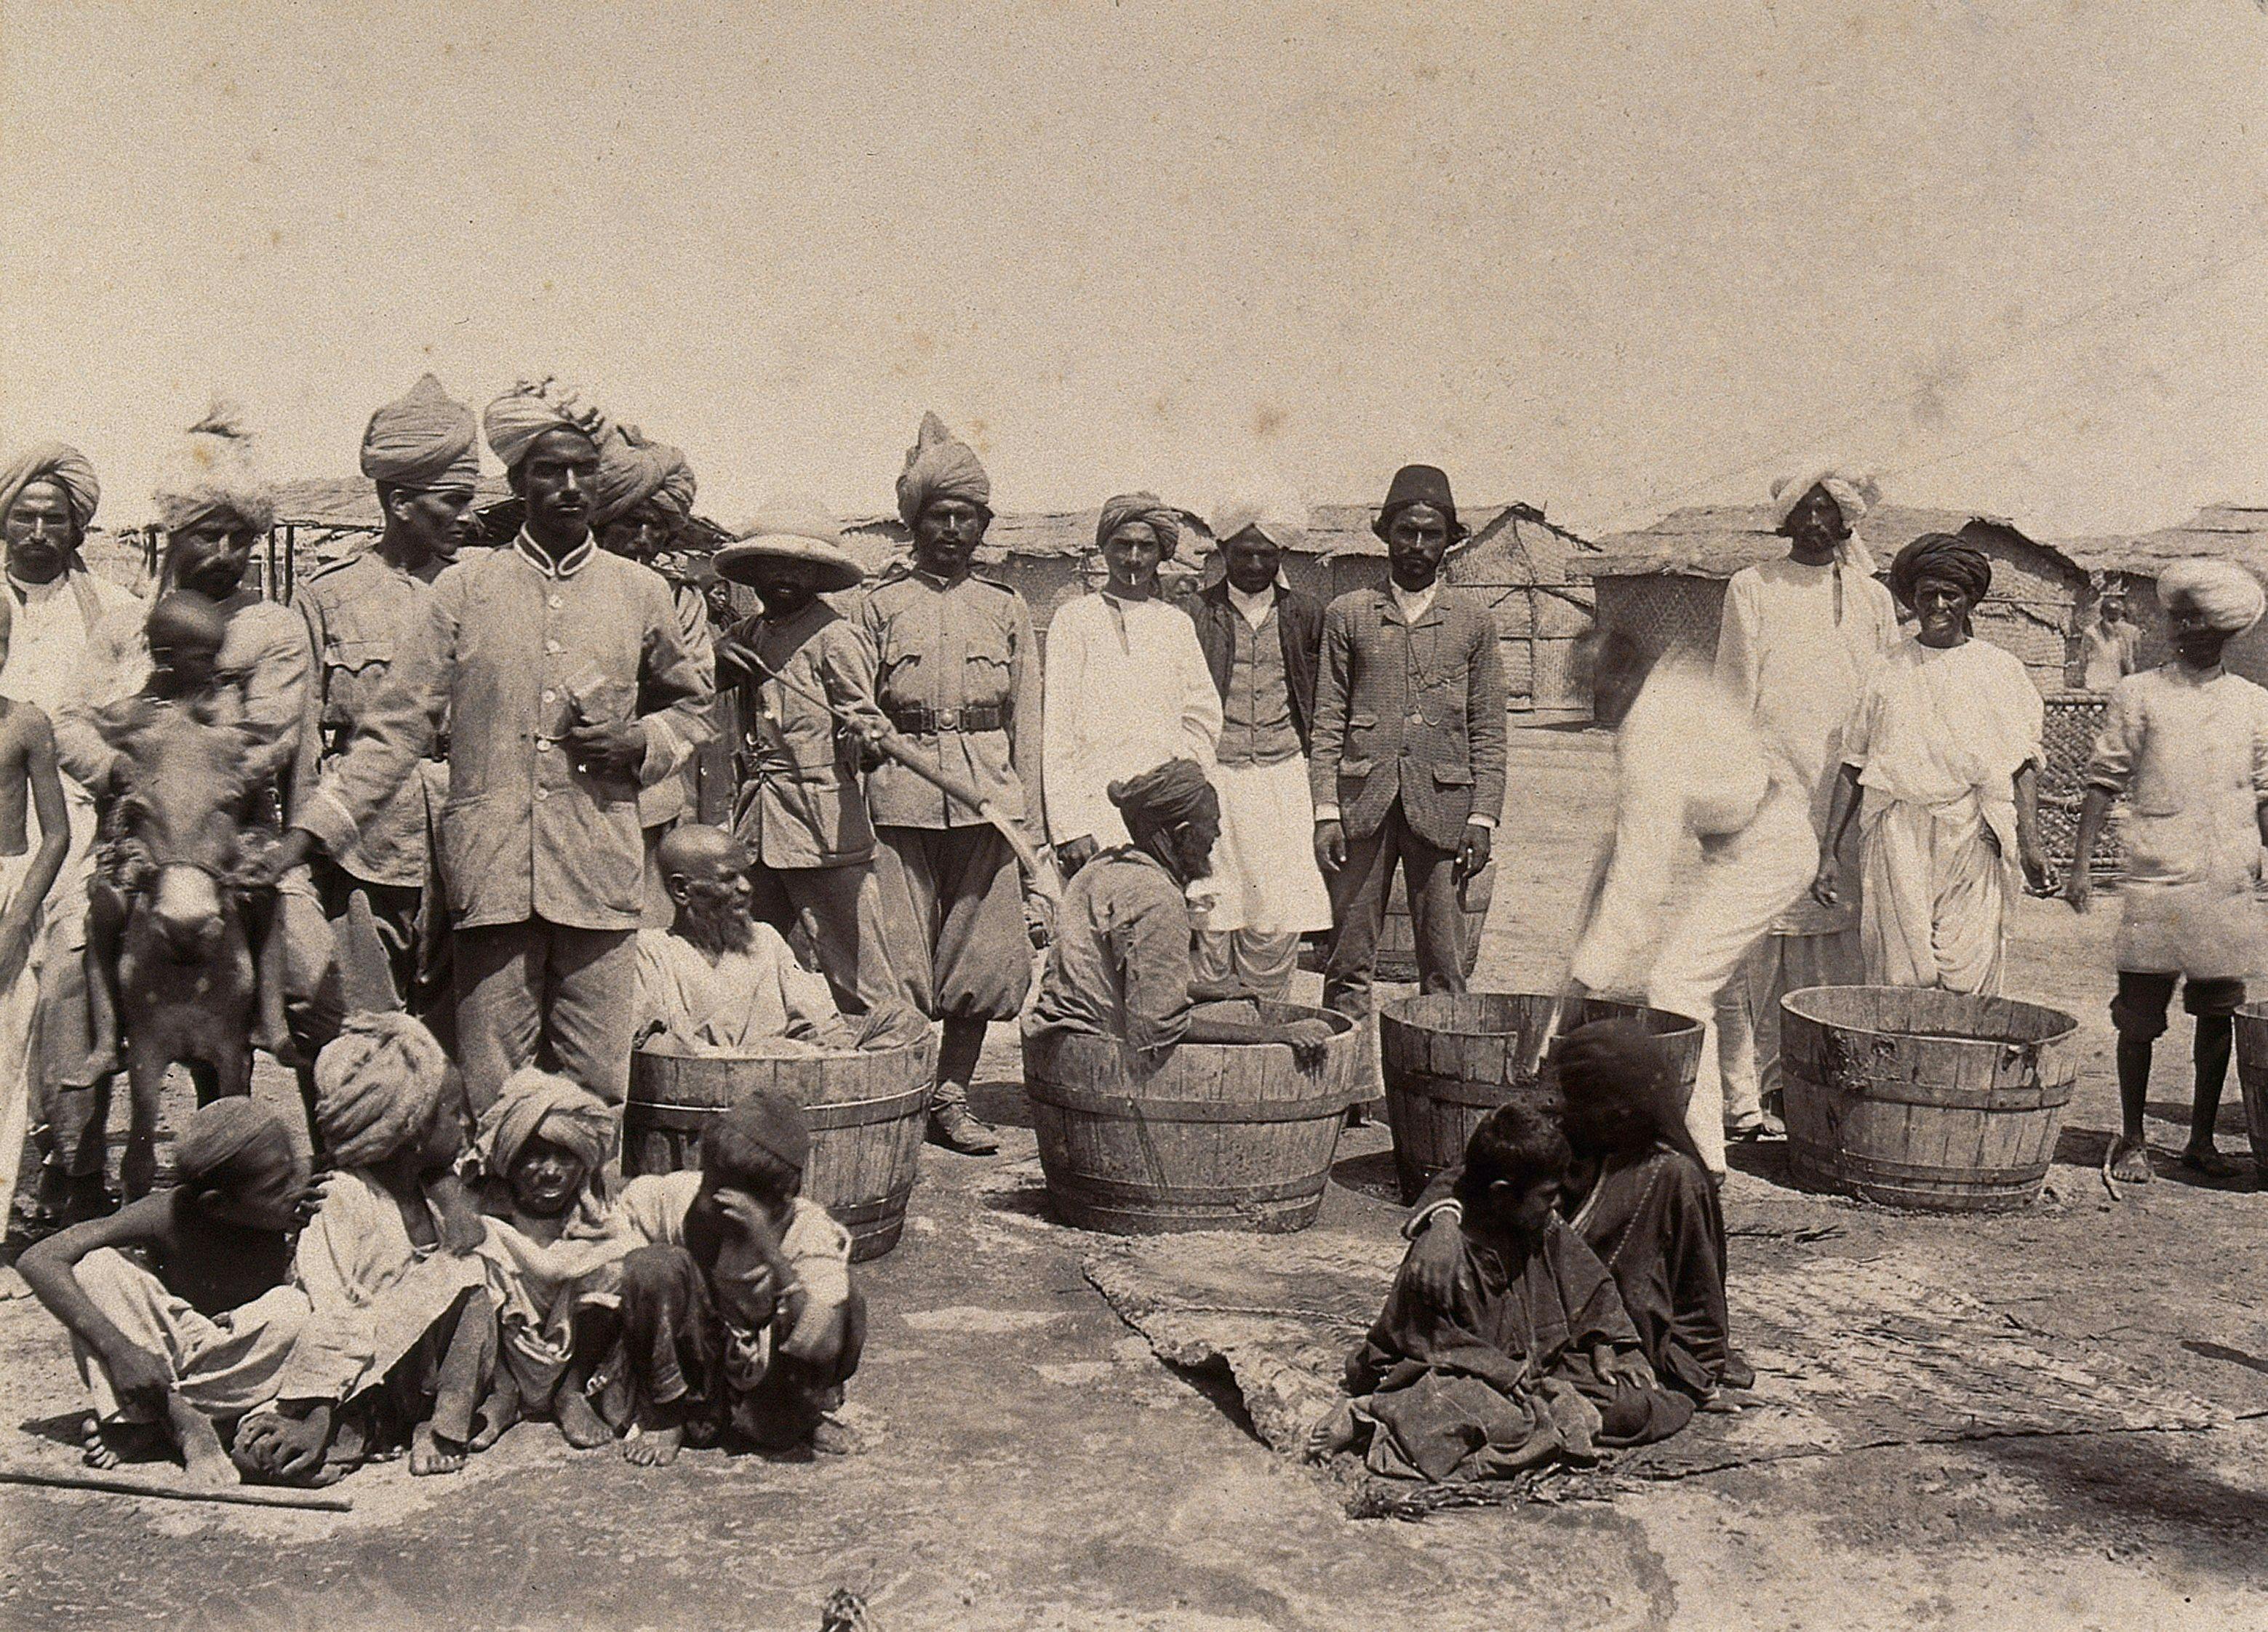 Disinfecting sufferers of the plague in wooden tubs, Karachi 